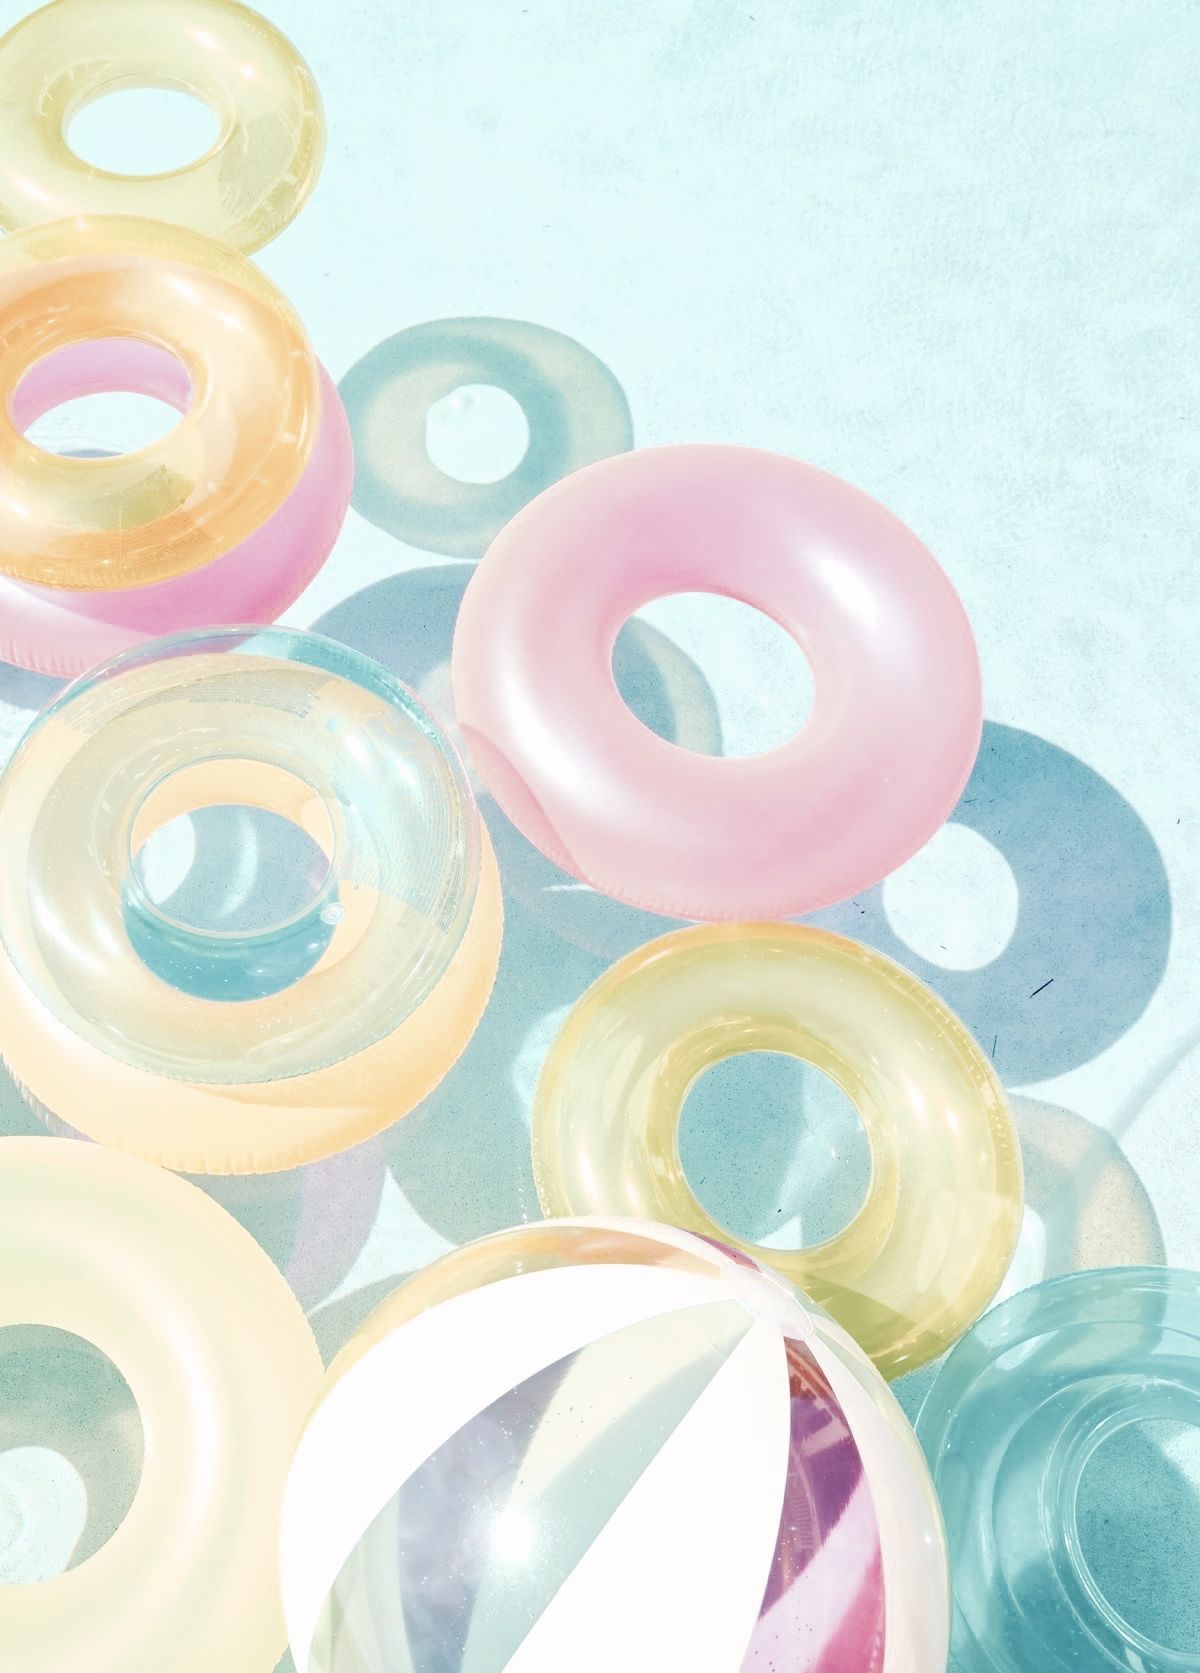 Pastel pool toys for summer swims. Pastel